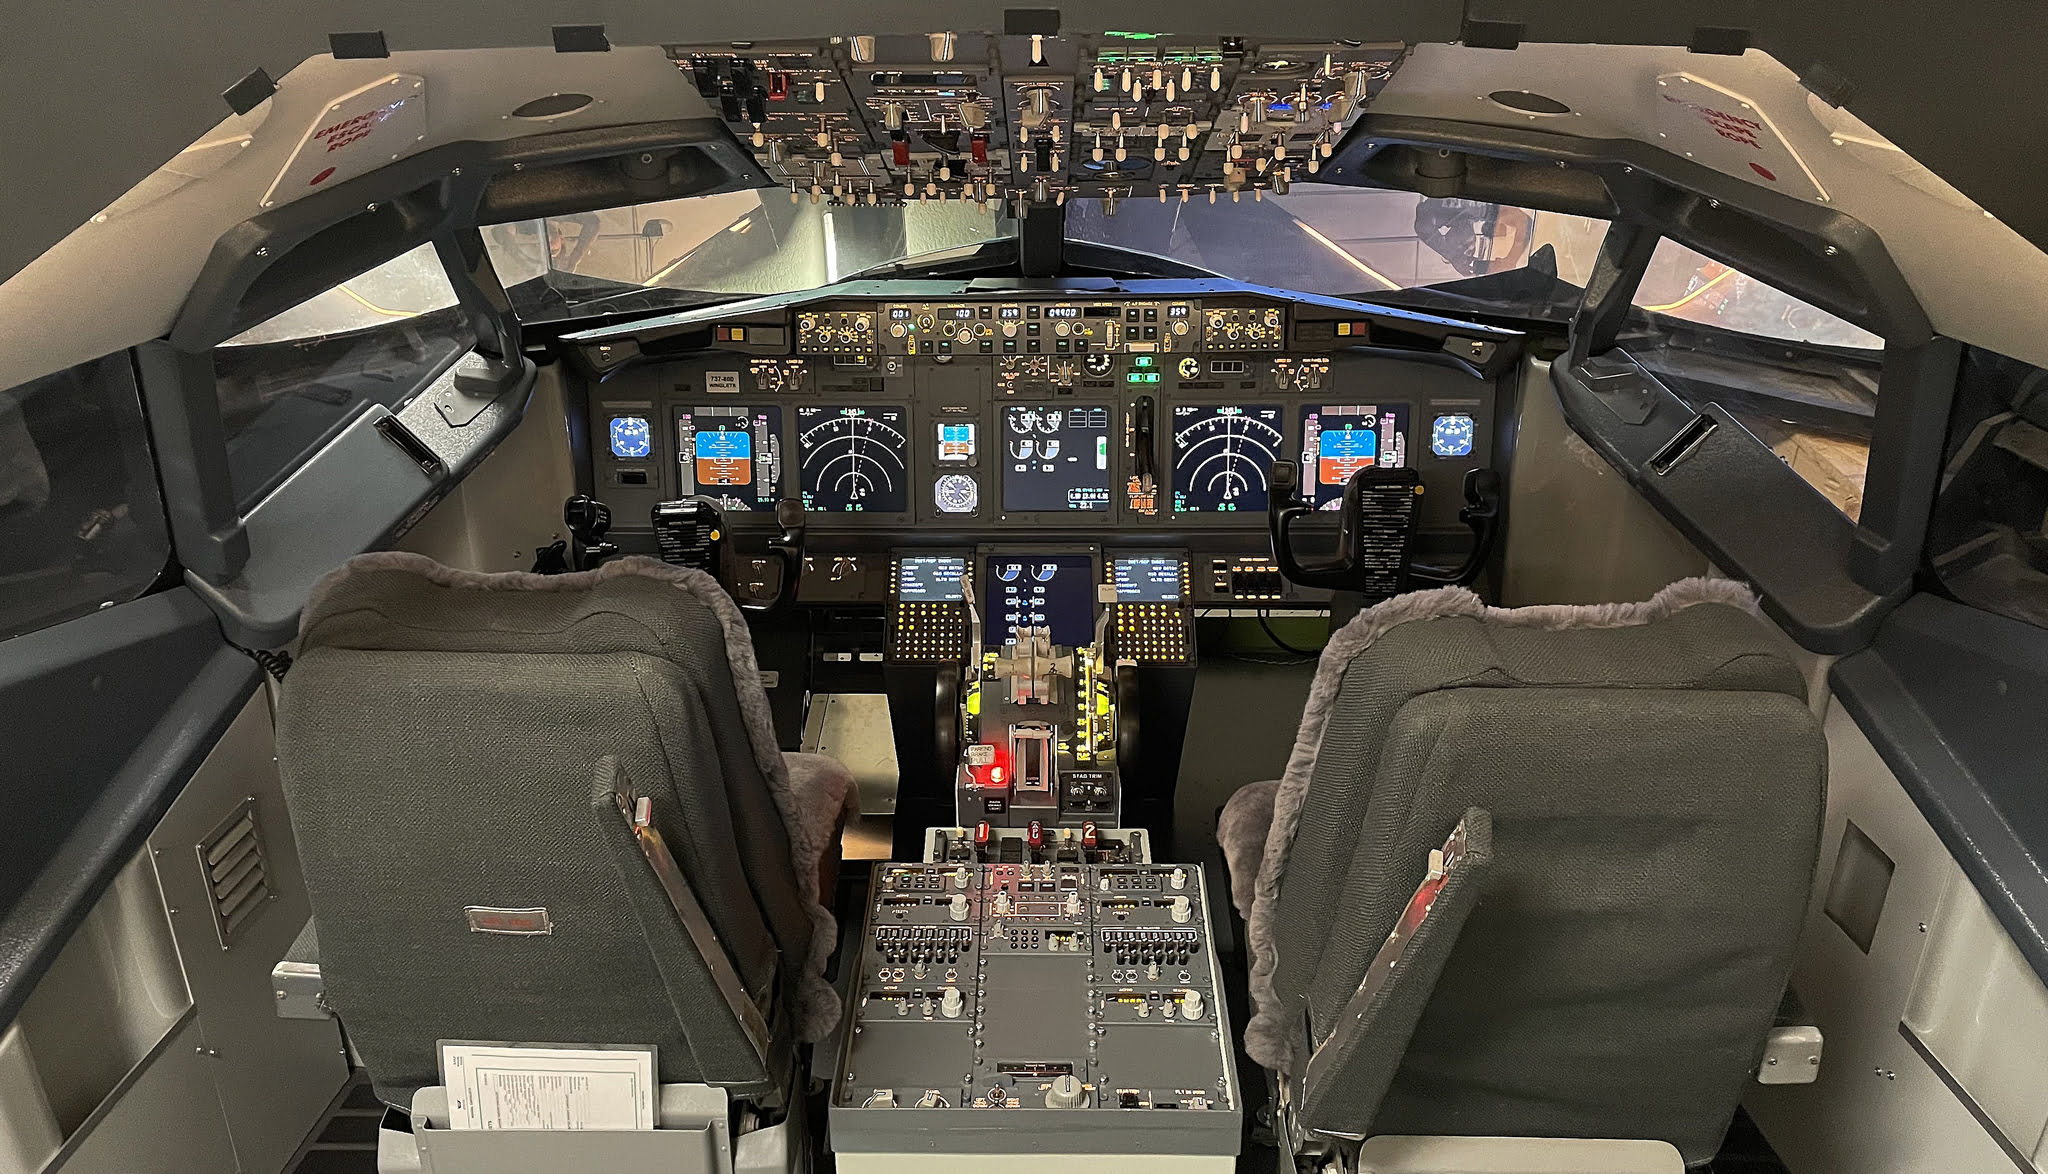 Wide view of my Boeing 737-800 cockpit